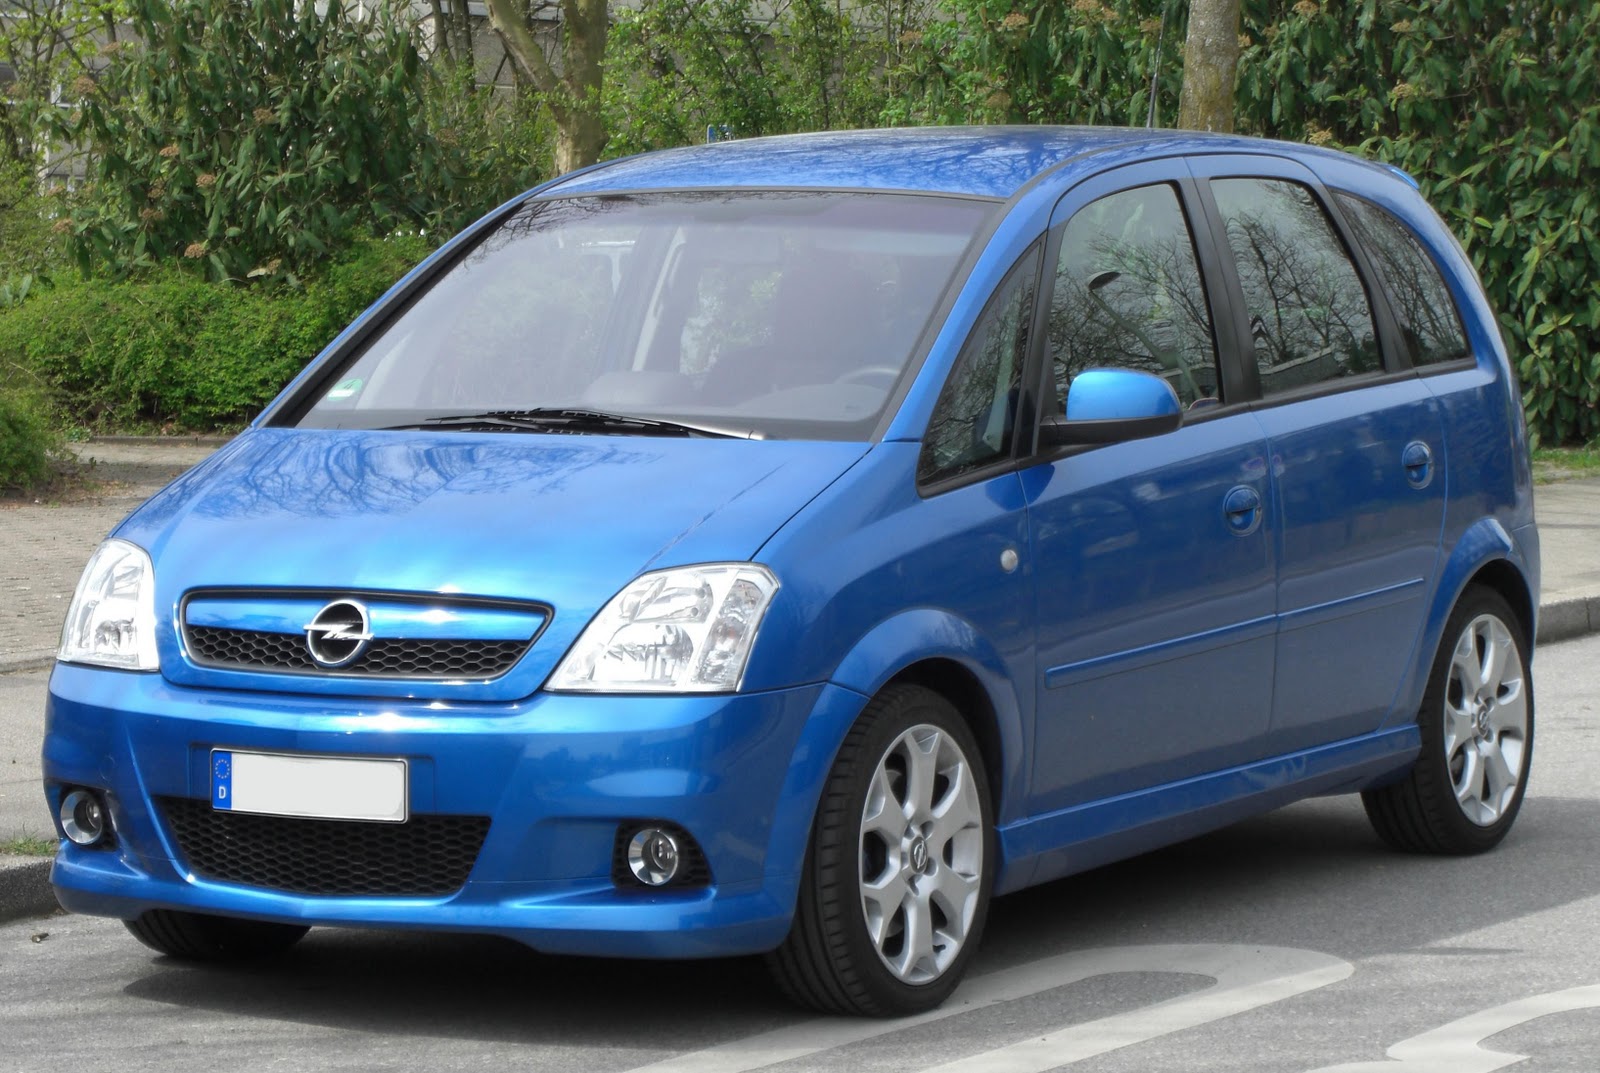 Opel Meriva OPC 2012 Cars preview and wallpaper gallery